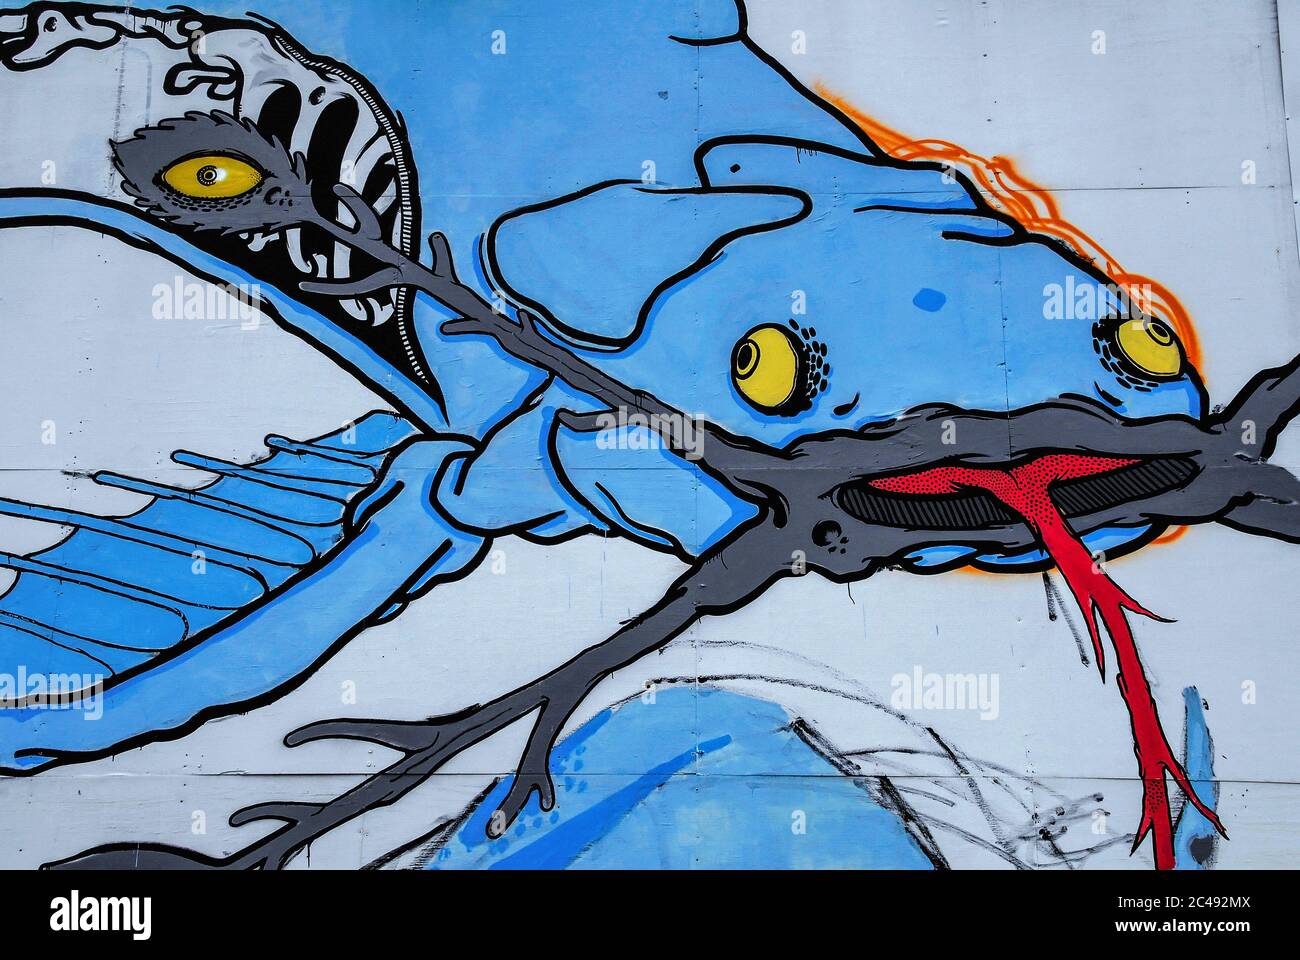 New to science … this blue catfish with four yellow eyes, a barbed red tongue and a zip-up body revealing its skeleton was among the artworks painted – legally – by street artists on a hoarding surrounding a former wine warehouse on the quayside of the northeast Italian port of Trieste, Friuli-Venezia Giulia, Italy, to promote Trieste Fest 2007, an international festival dedicated to the communication of science. Stock Photo